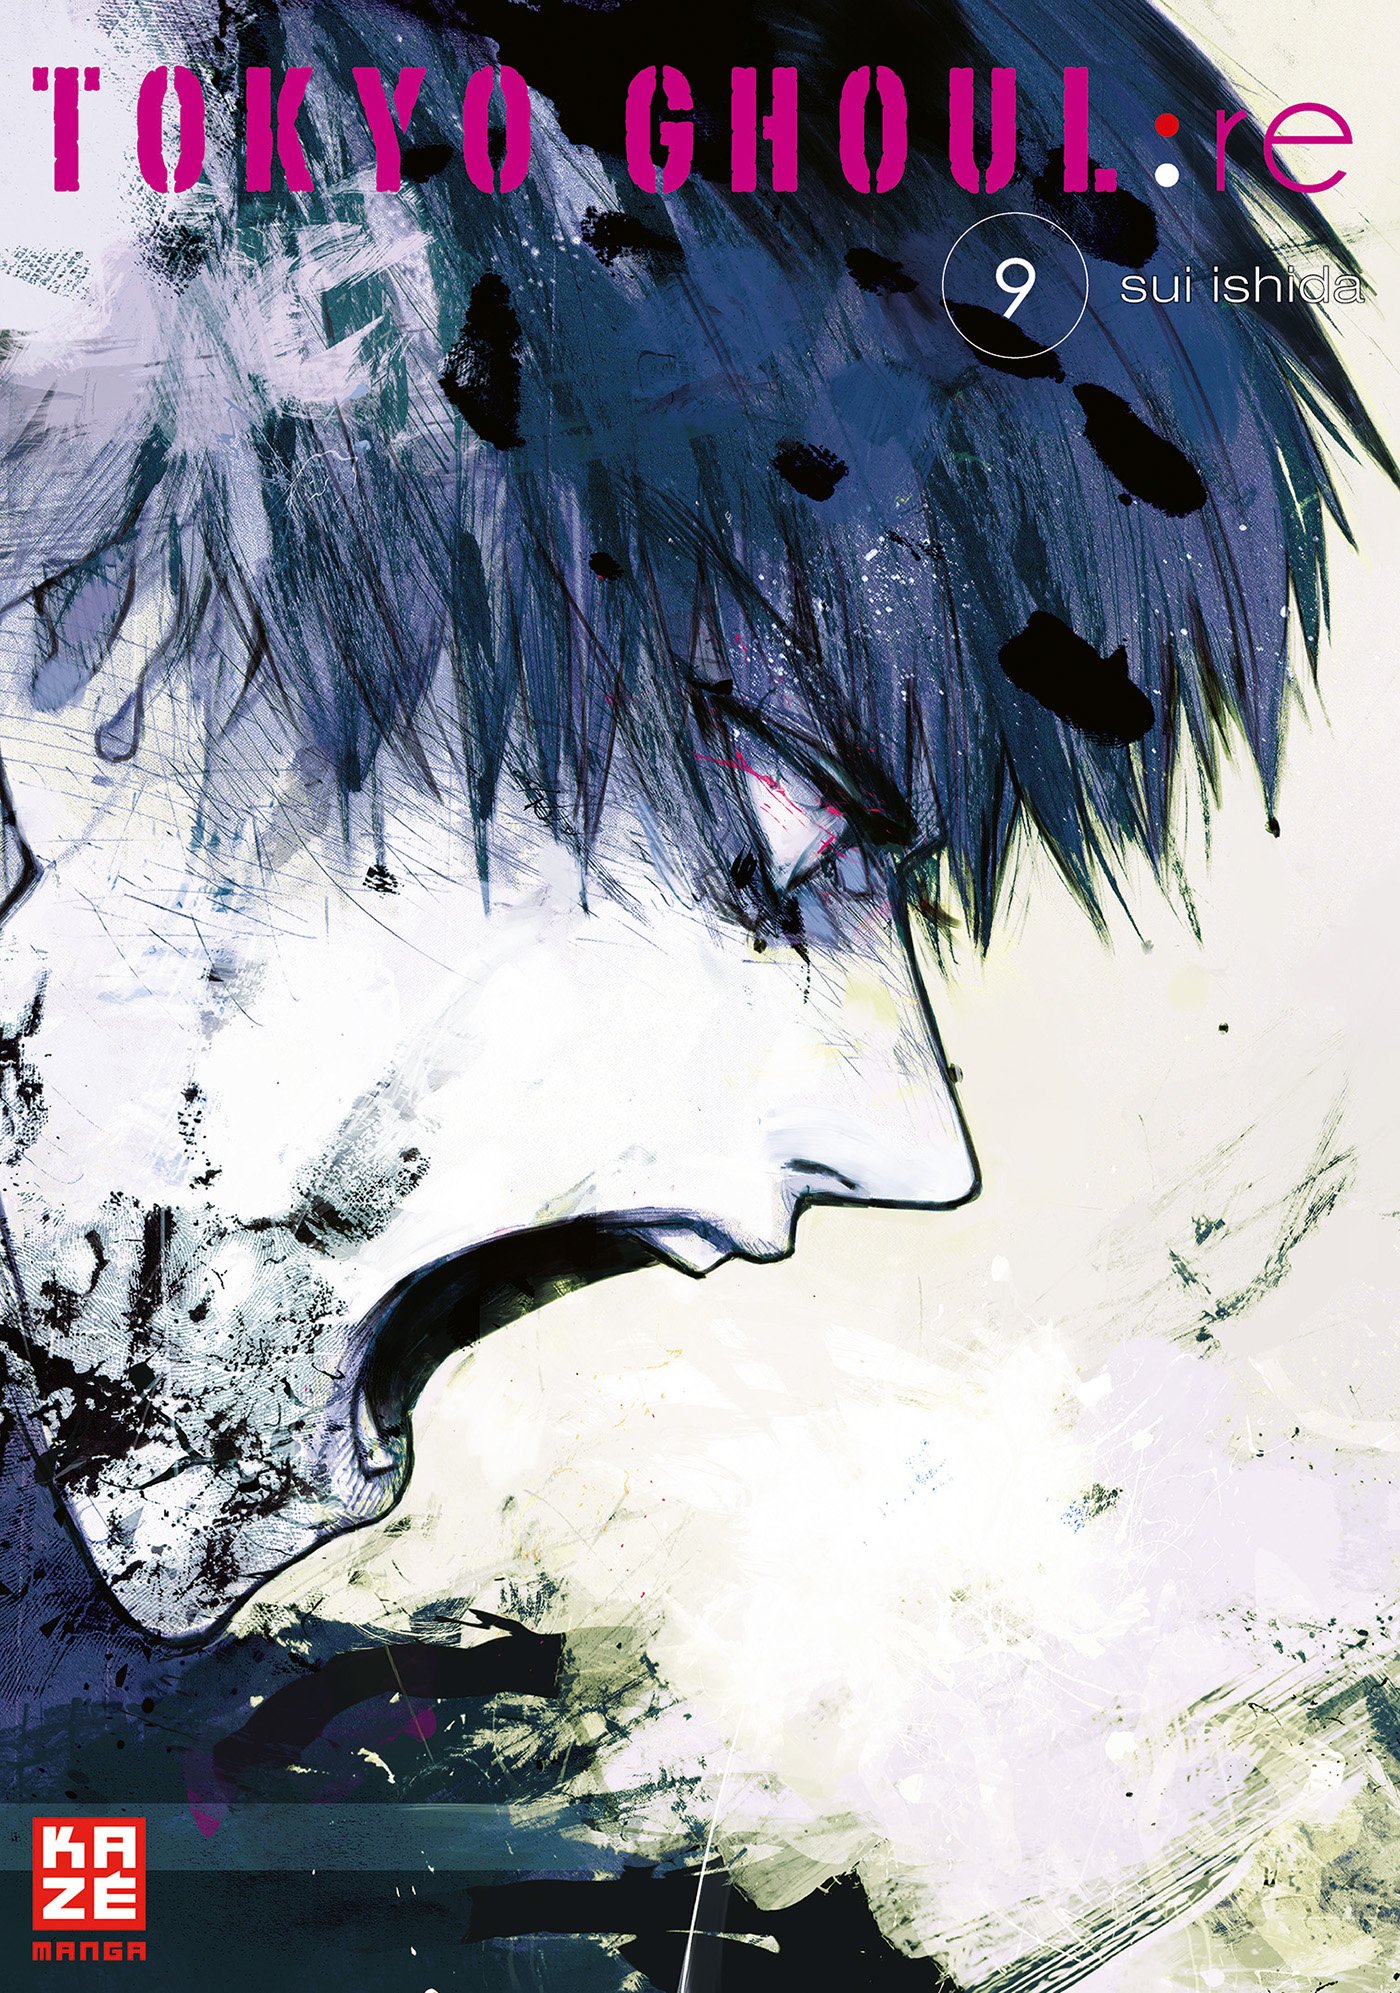 TOKYO GHOUL - (FRENCH V.) - TOKYO GHOUL : RE 09 / COMICS IN FRENCH / SEINEN